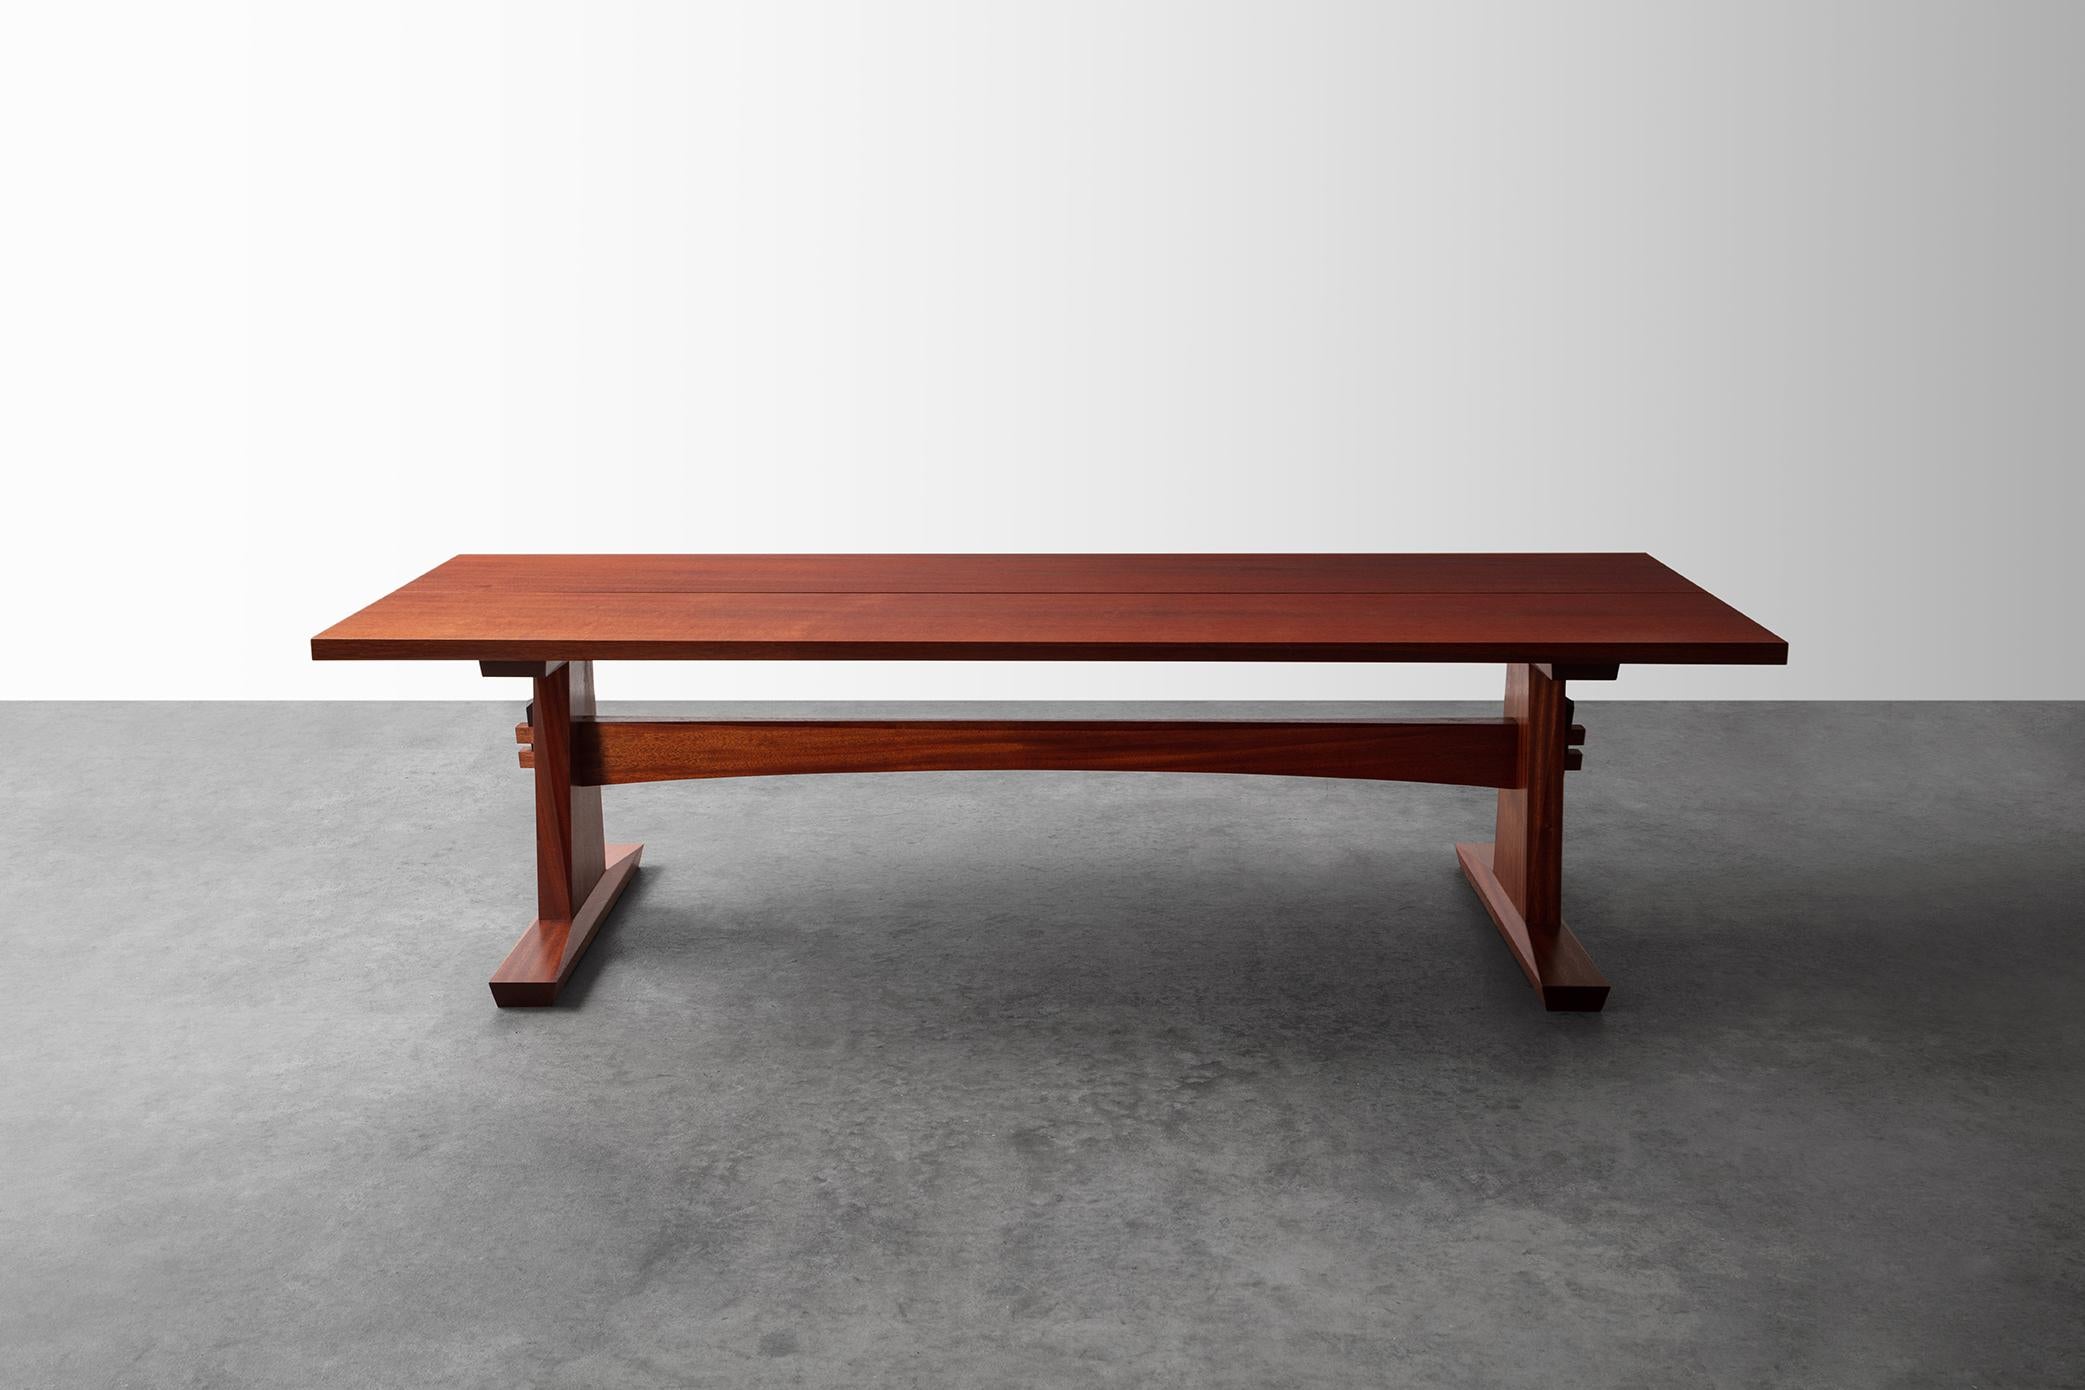 This striking Coffee Table, with it's trestle base and traditional joinery is unlike much of Richard's work. This piece, made of salvaged Sappelle, is both beautiful and sturdy. The hand-cut joinery of the trestle base is accentuated with a pair of